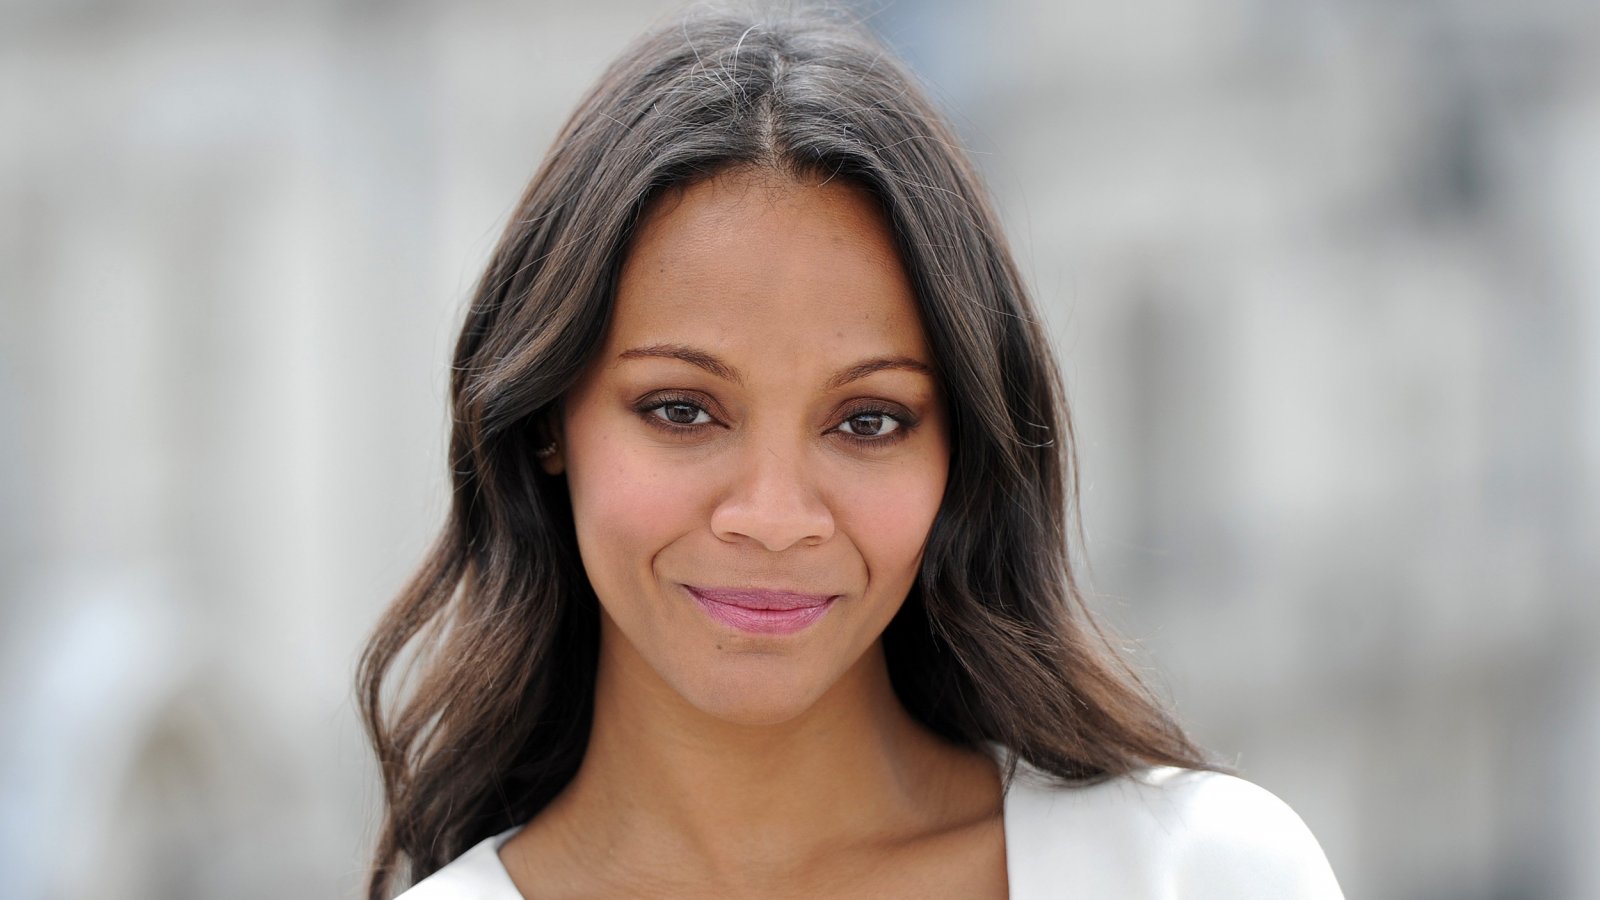 Zoe Saldana stars in the Russo brothers' survival movie The Bluff